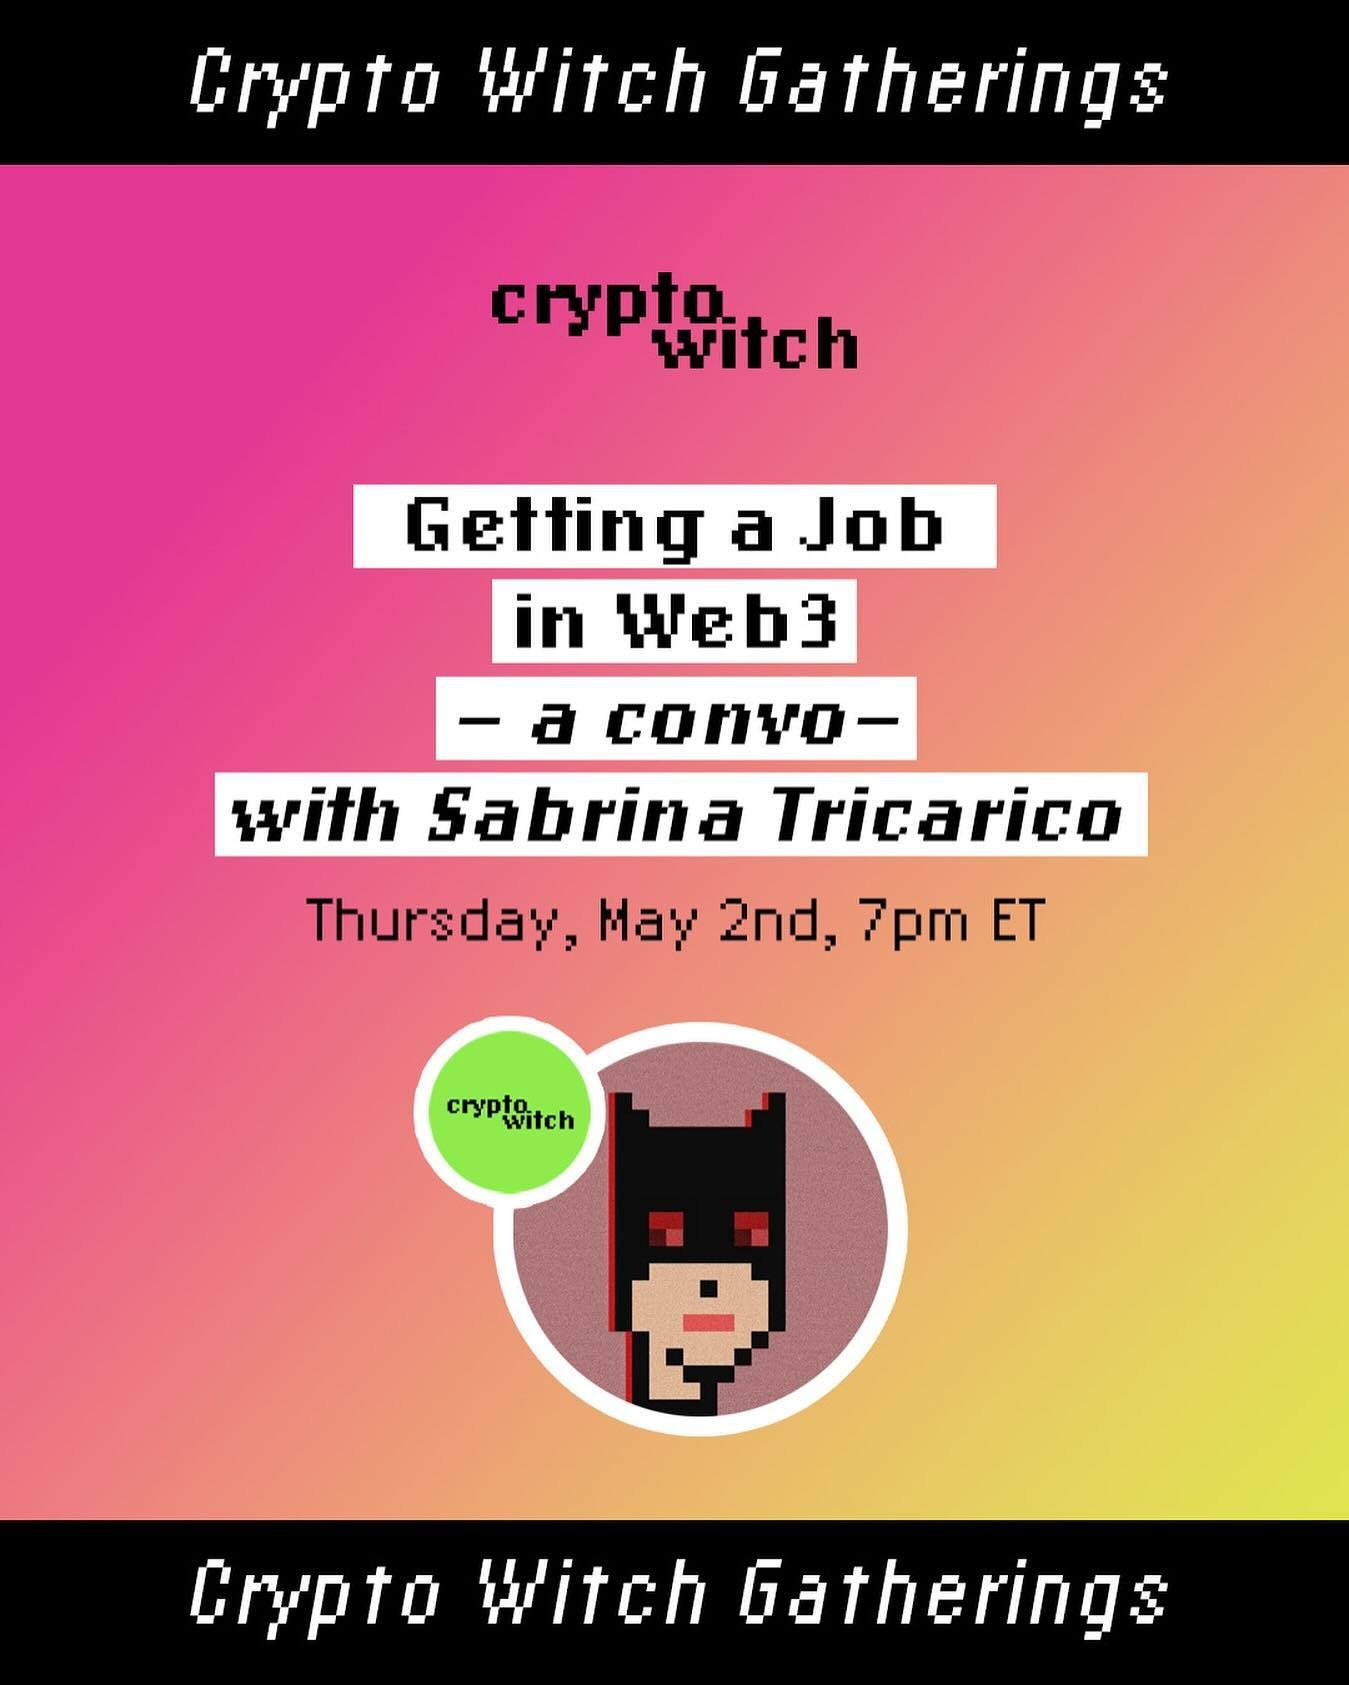 GM witches! 🔮l Looking for a career in Web3? Our upcoming gathering on how to bring your skills to Web3 is happening TOMORROW &mdash; don&rsquo;t miss out! 🫴 We&rsquo;ll be chatting with @sabrinatricarico, Head of Marketing at Figment, on how to fi